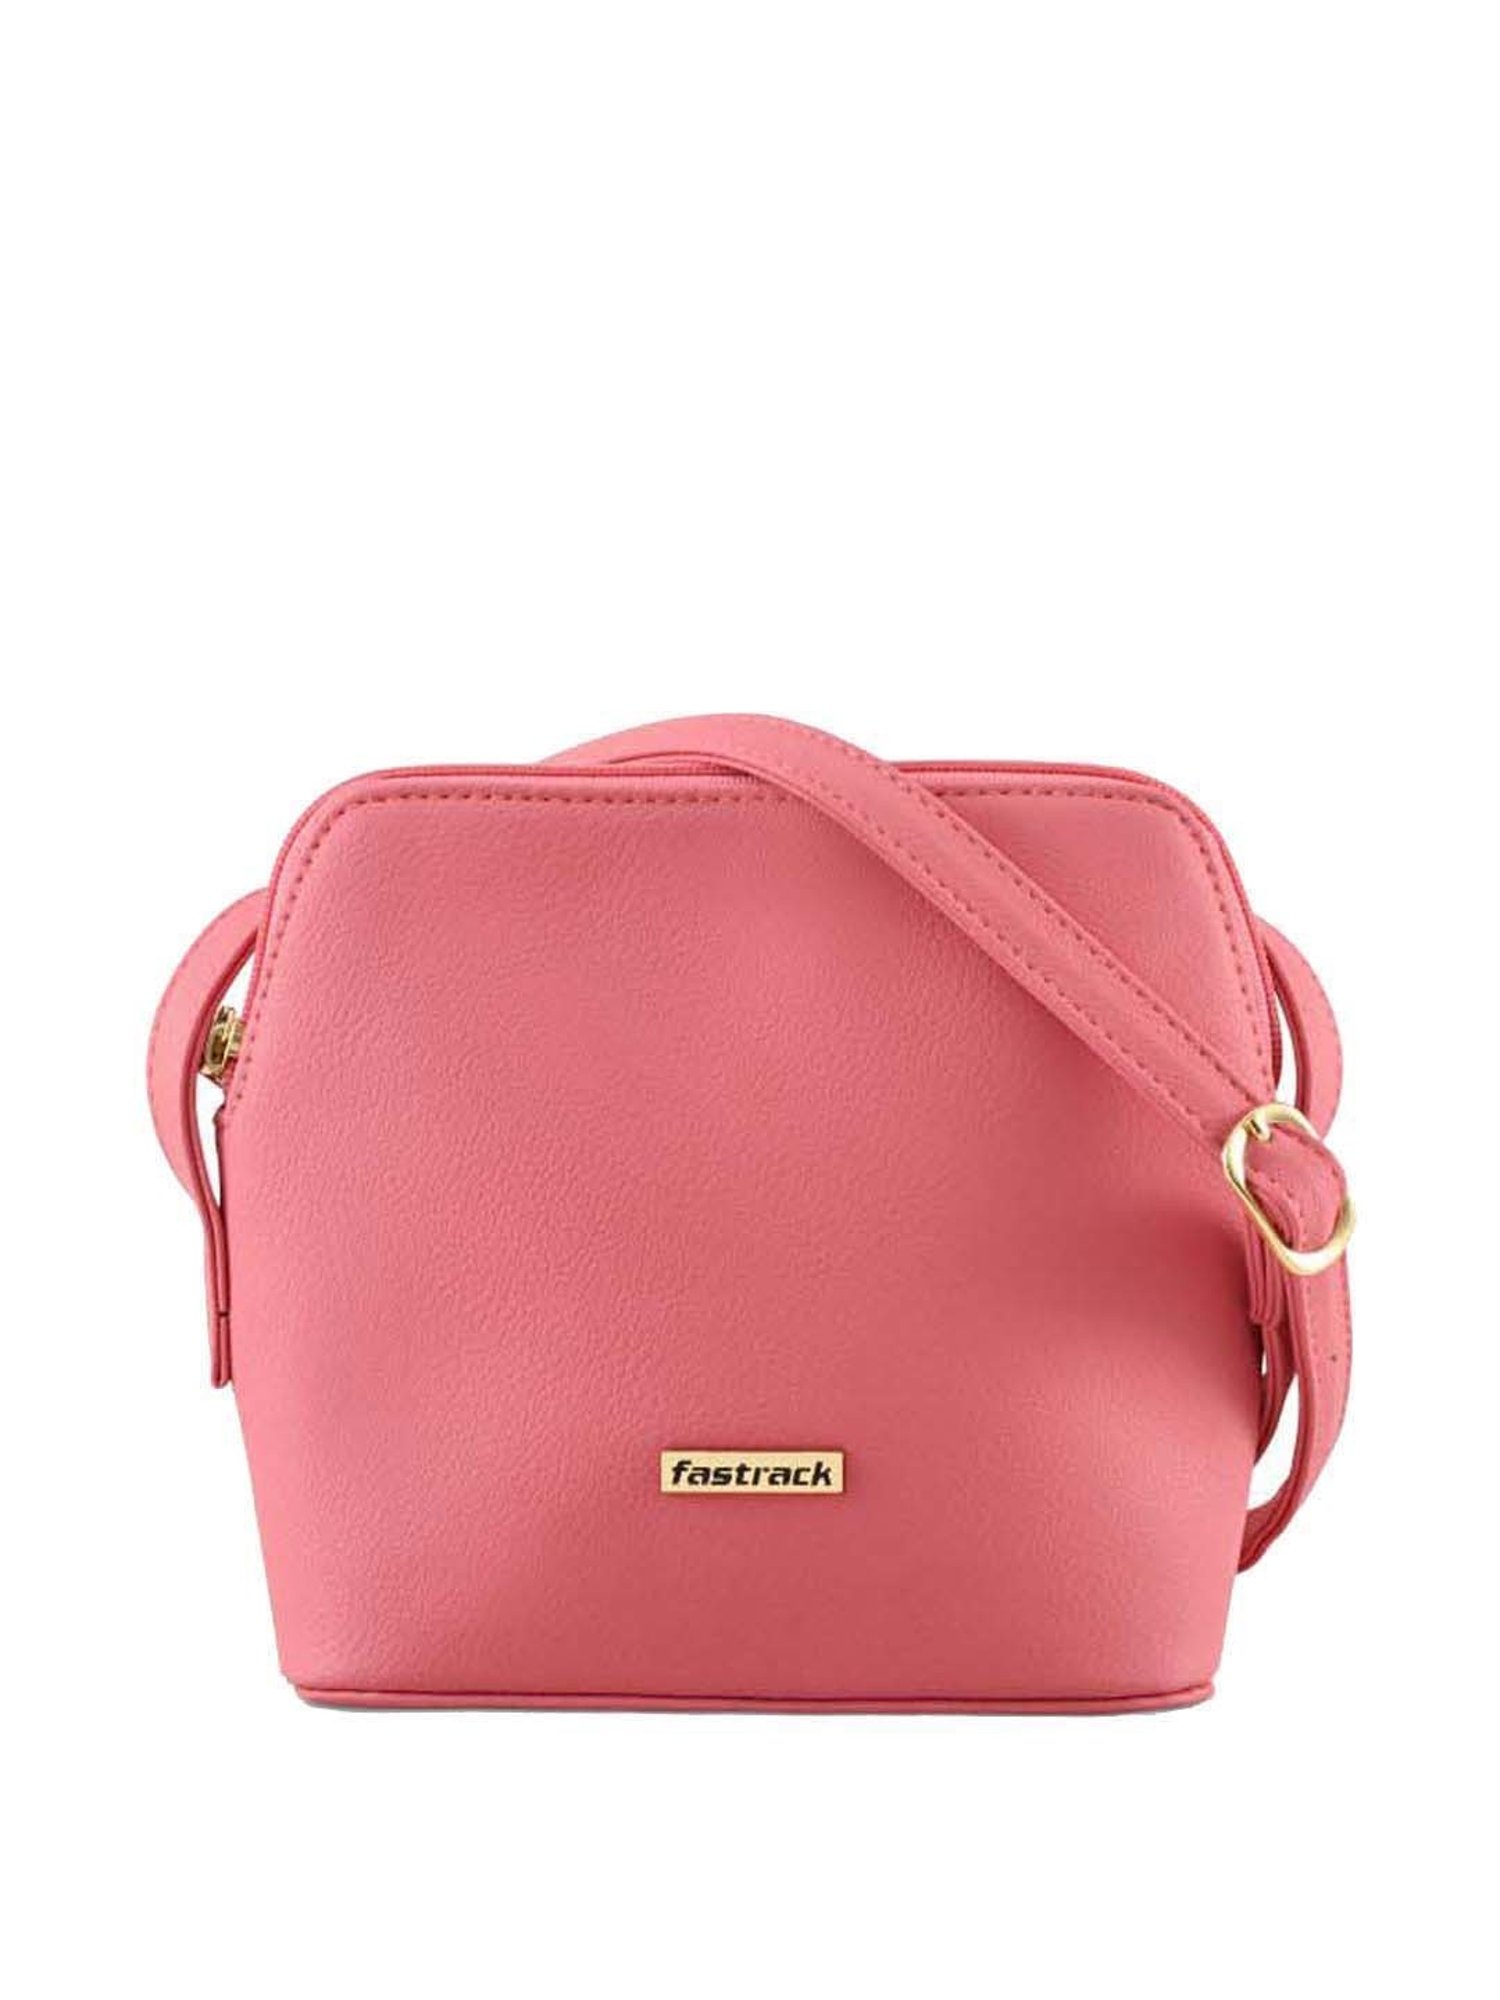 Fastrack Women's Sling Bag (Red) : Amazon.in: Fashion